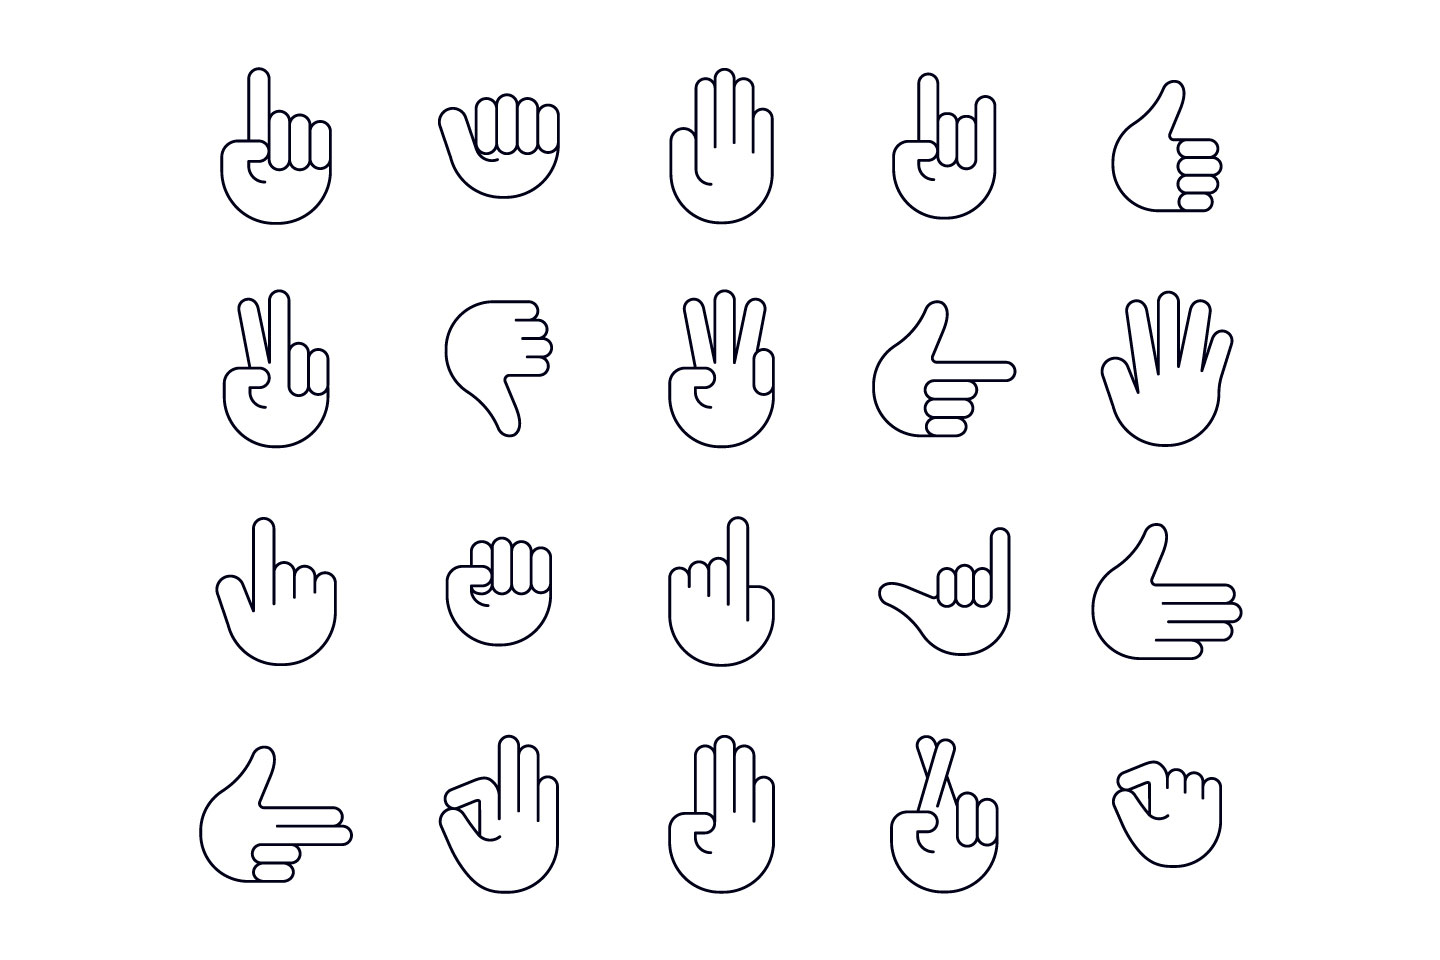 Hands Png Free Vector Icons In Svg Psd Png Eps And Icon Font | Sexiz Pix